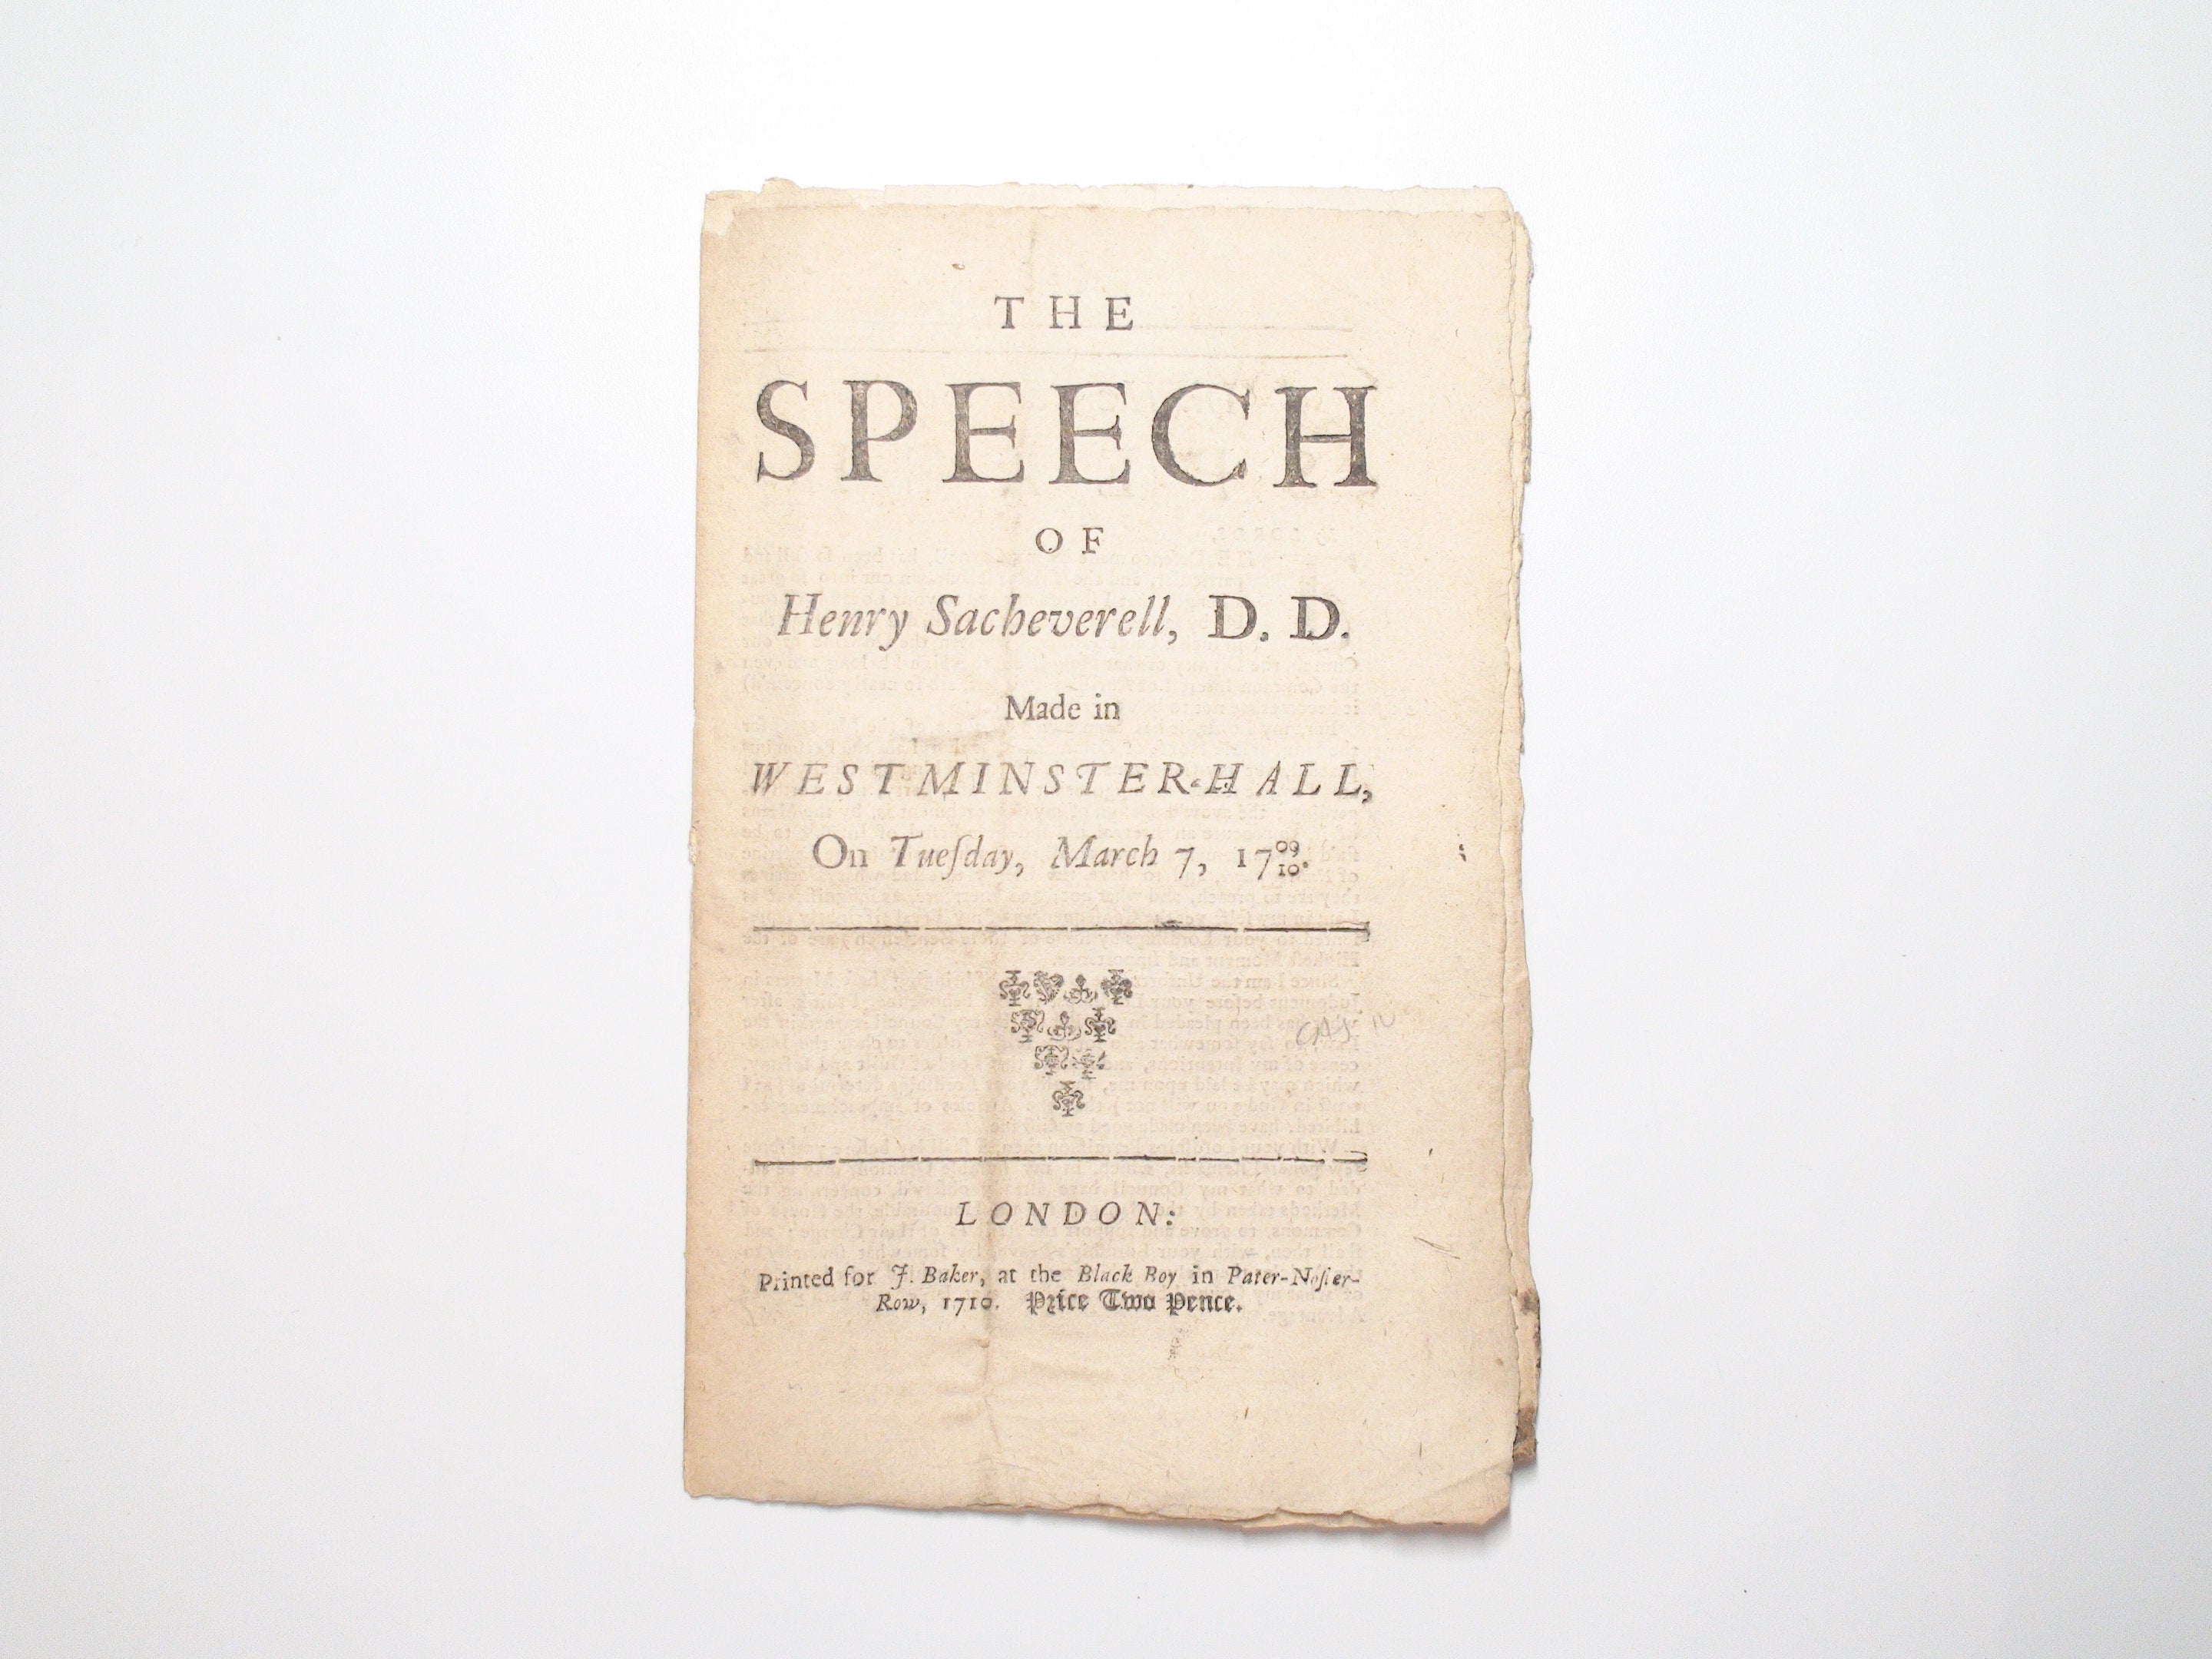 The Speech of Henry Sacheverell Made in Westminster Hall, Rare, March 7, 1710